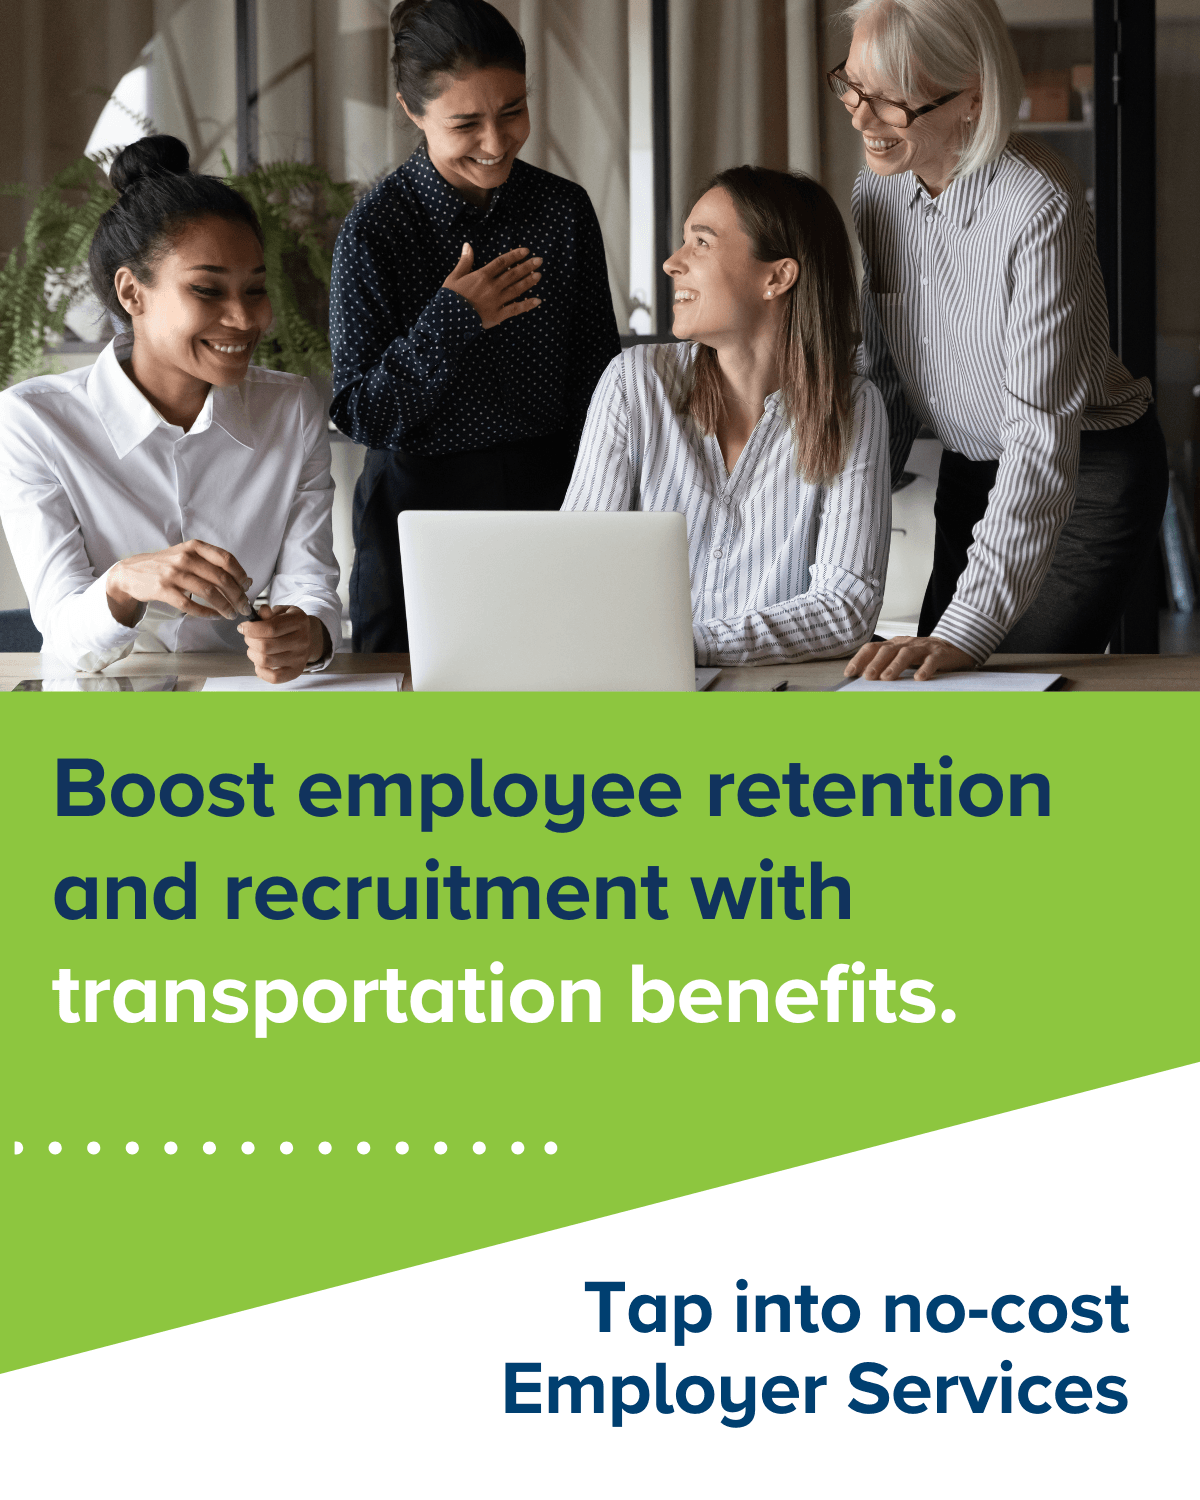 Employer Services graphic with tagline about transportation benefits for employees.